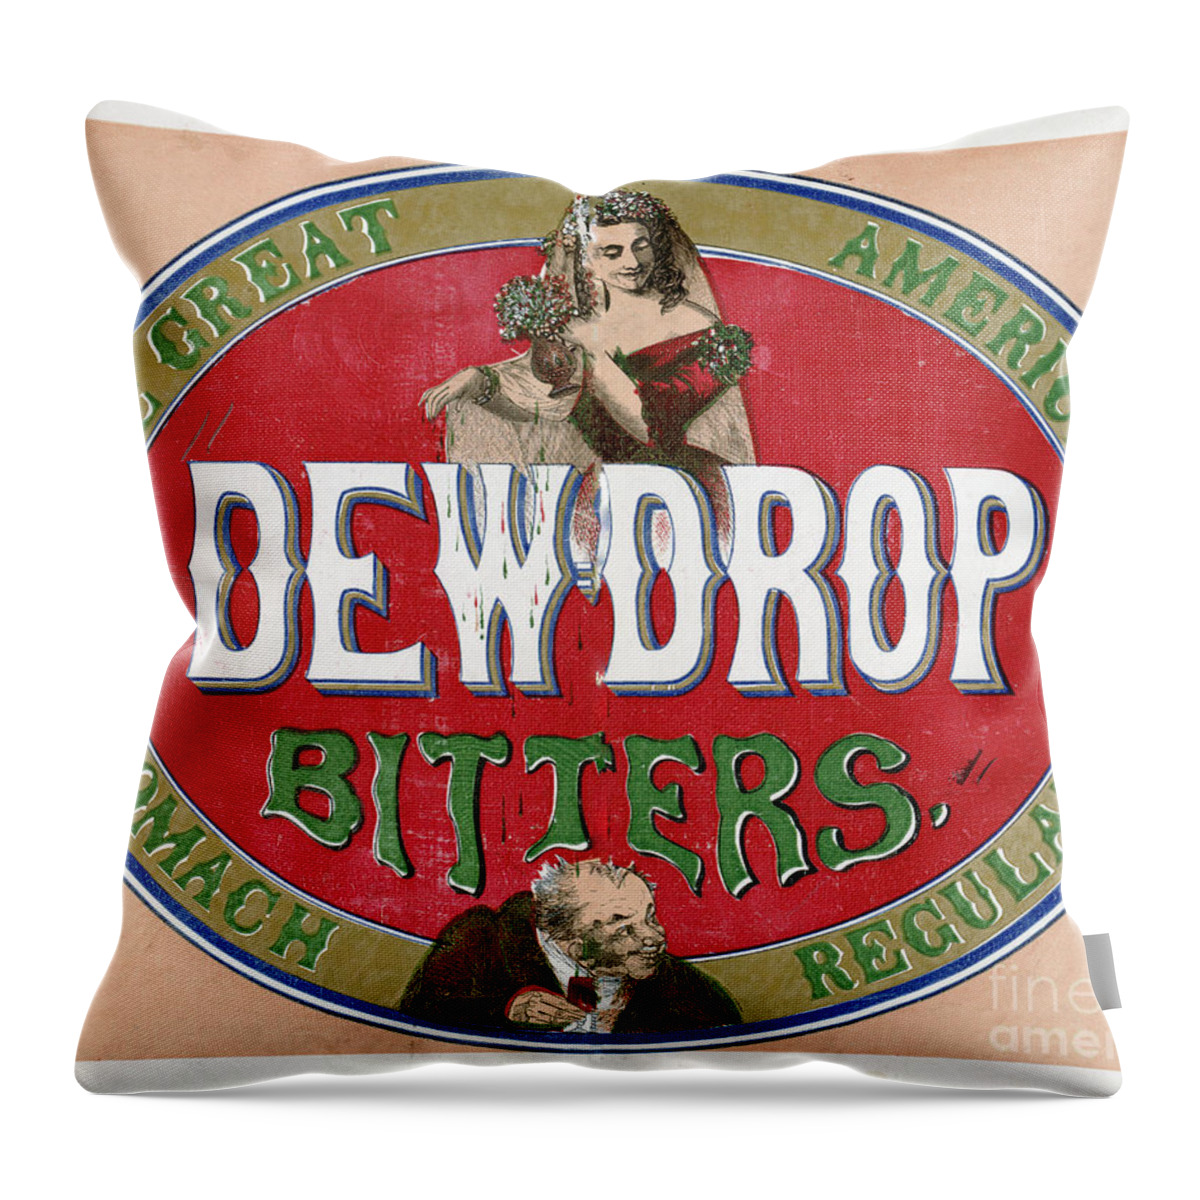 Dewdrop Throw Pillow featuring the mixed media Dew Drop Bitters Vintage Product Label by Edward Fielding